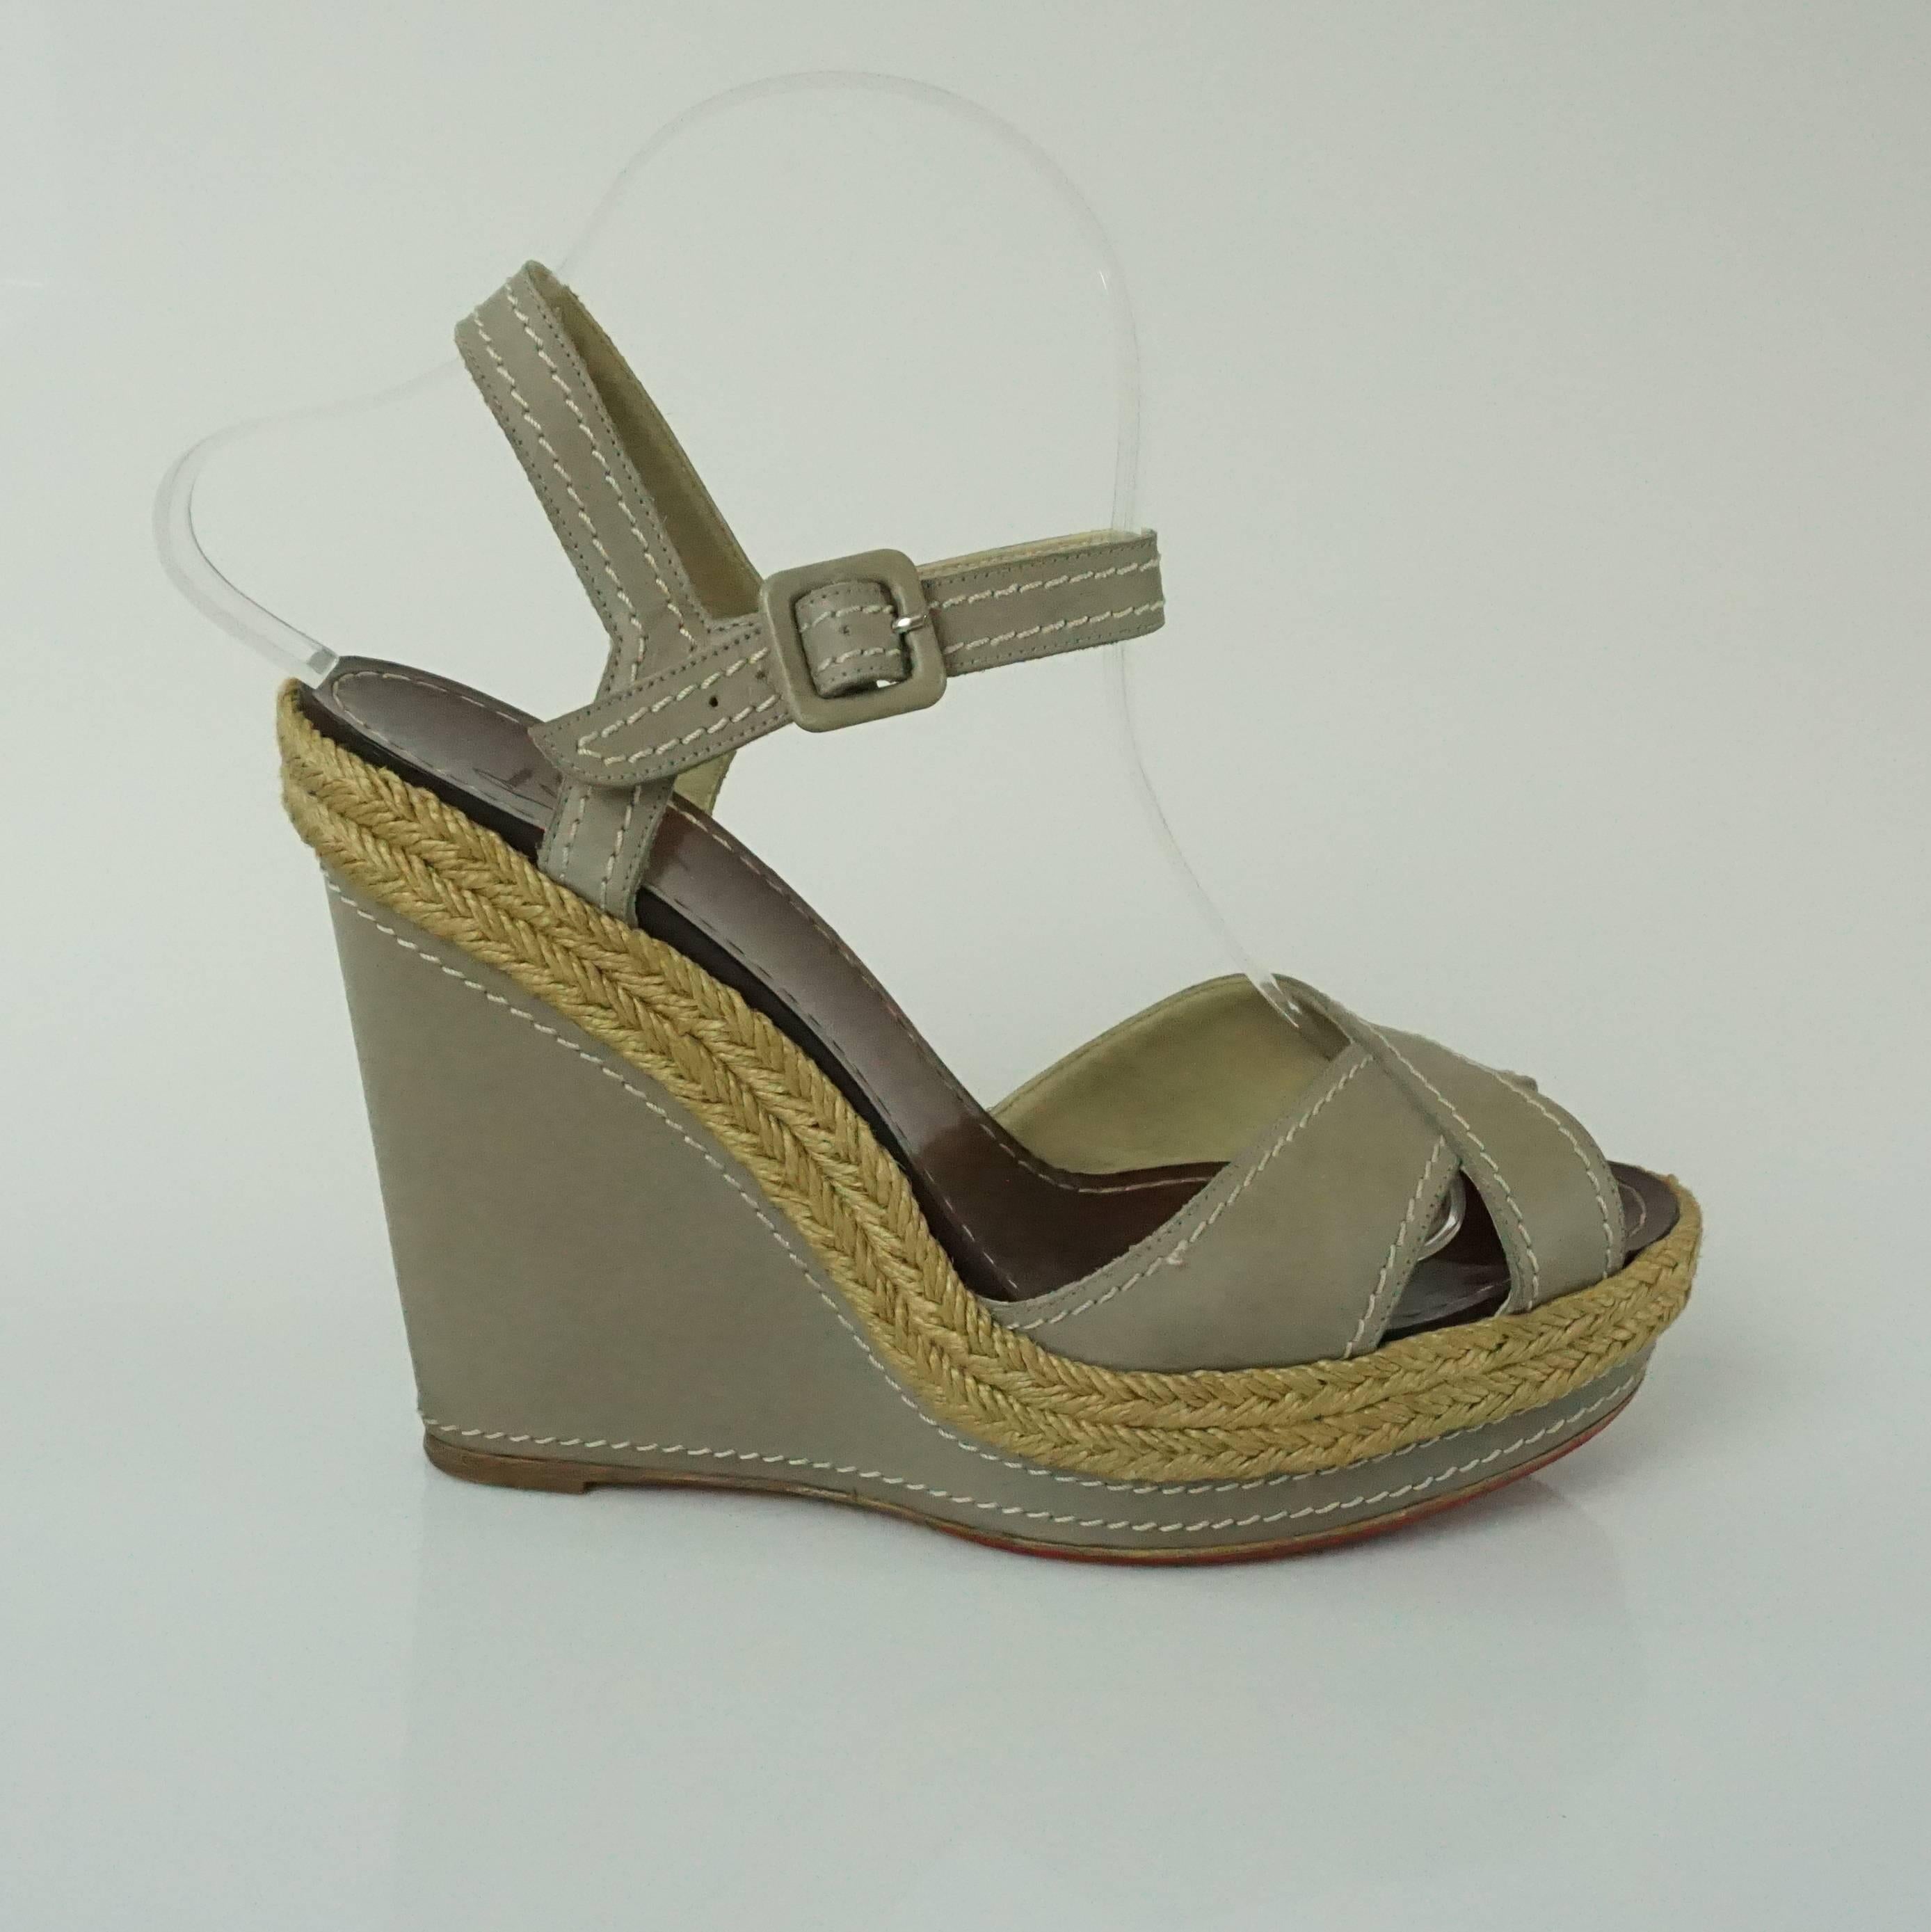 These Louboutin taupe leather wedges have a straw trim on the bottom and ankle strap. They have an open toe with crossing leather straps. The shoes are in good condition with light marks on the wedge and some small stains as seen in the images.